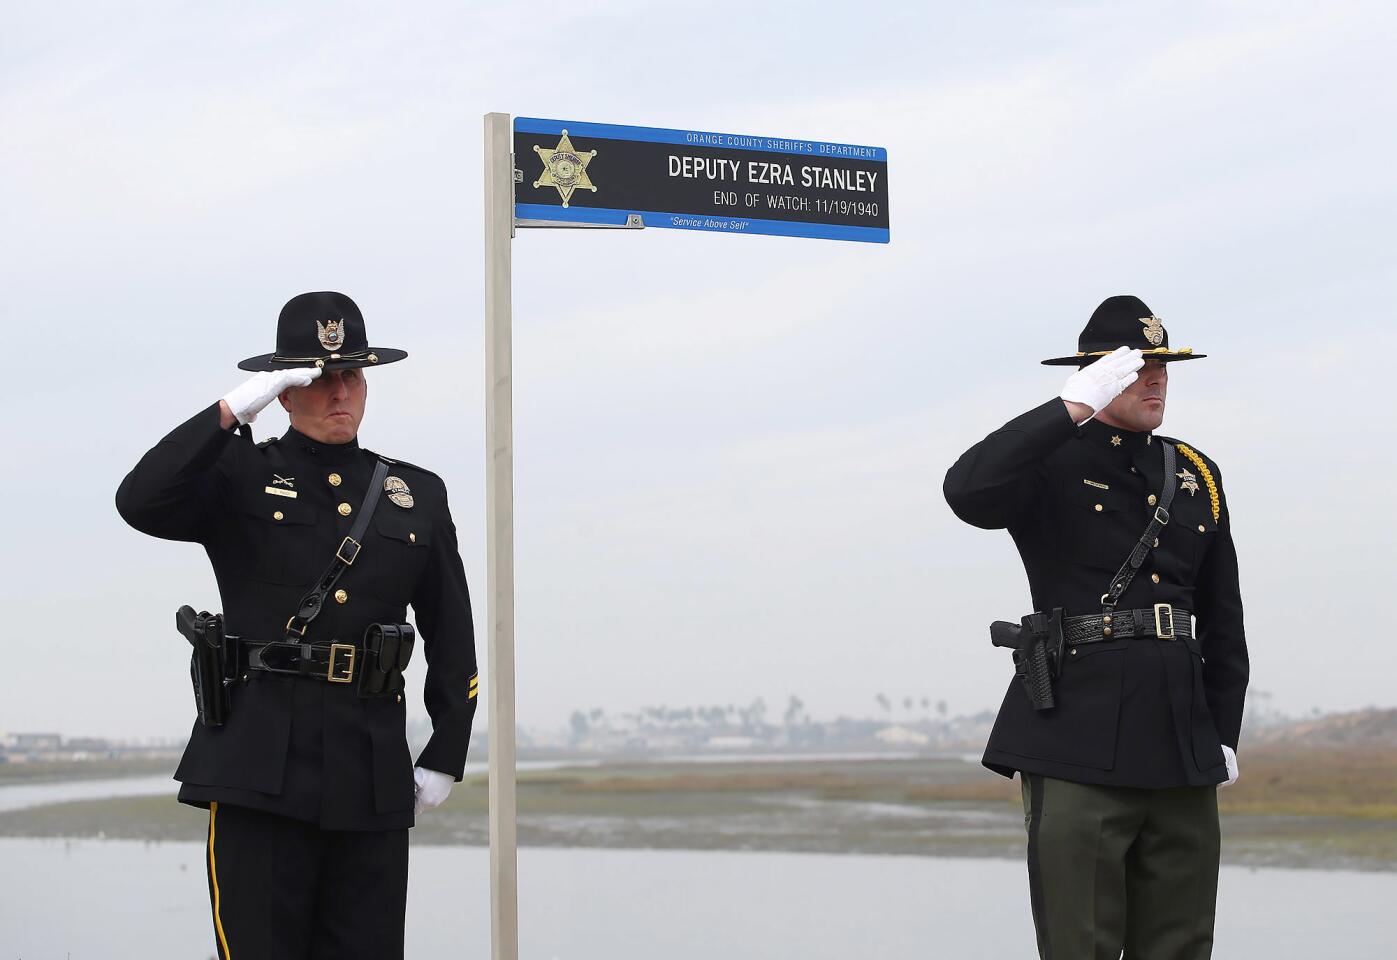 Gabe Ribbi, left, and Patrick Medeiros of the Orange County Sheriff's Department salute as a memorial sign is dedicated in honor of sheriff's Deputy Ezra Stanley on Monday near the Bolsa Chica wetlands in Huntington Beach. The ceremony was held 78 years to the day after Stanley was killed in a crash on Pacific Coast Highway while on duty in Huntington Beach.